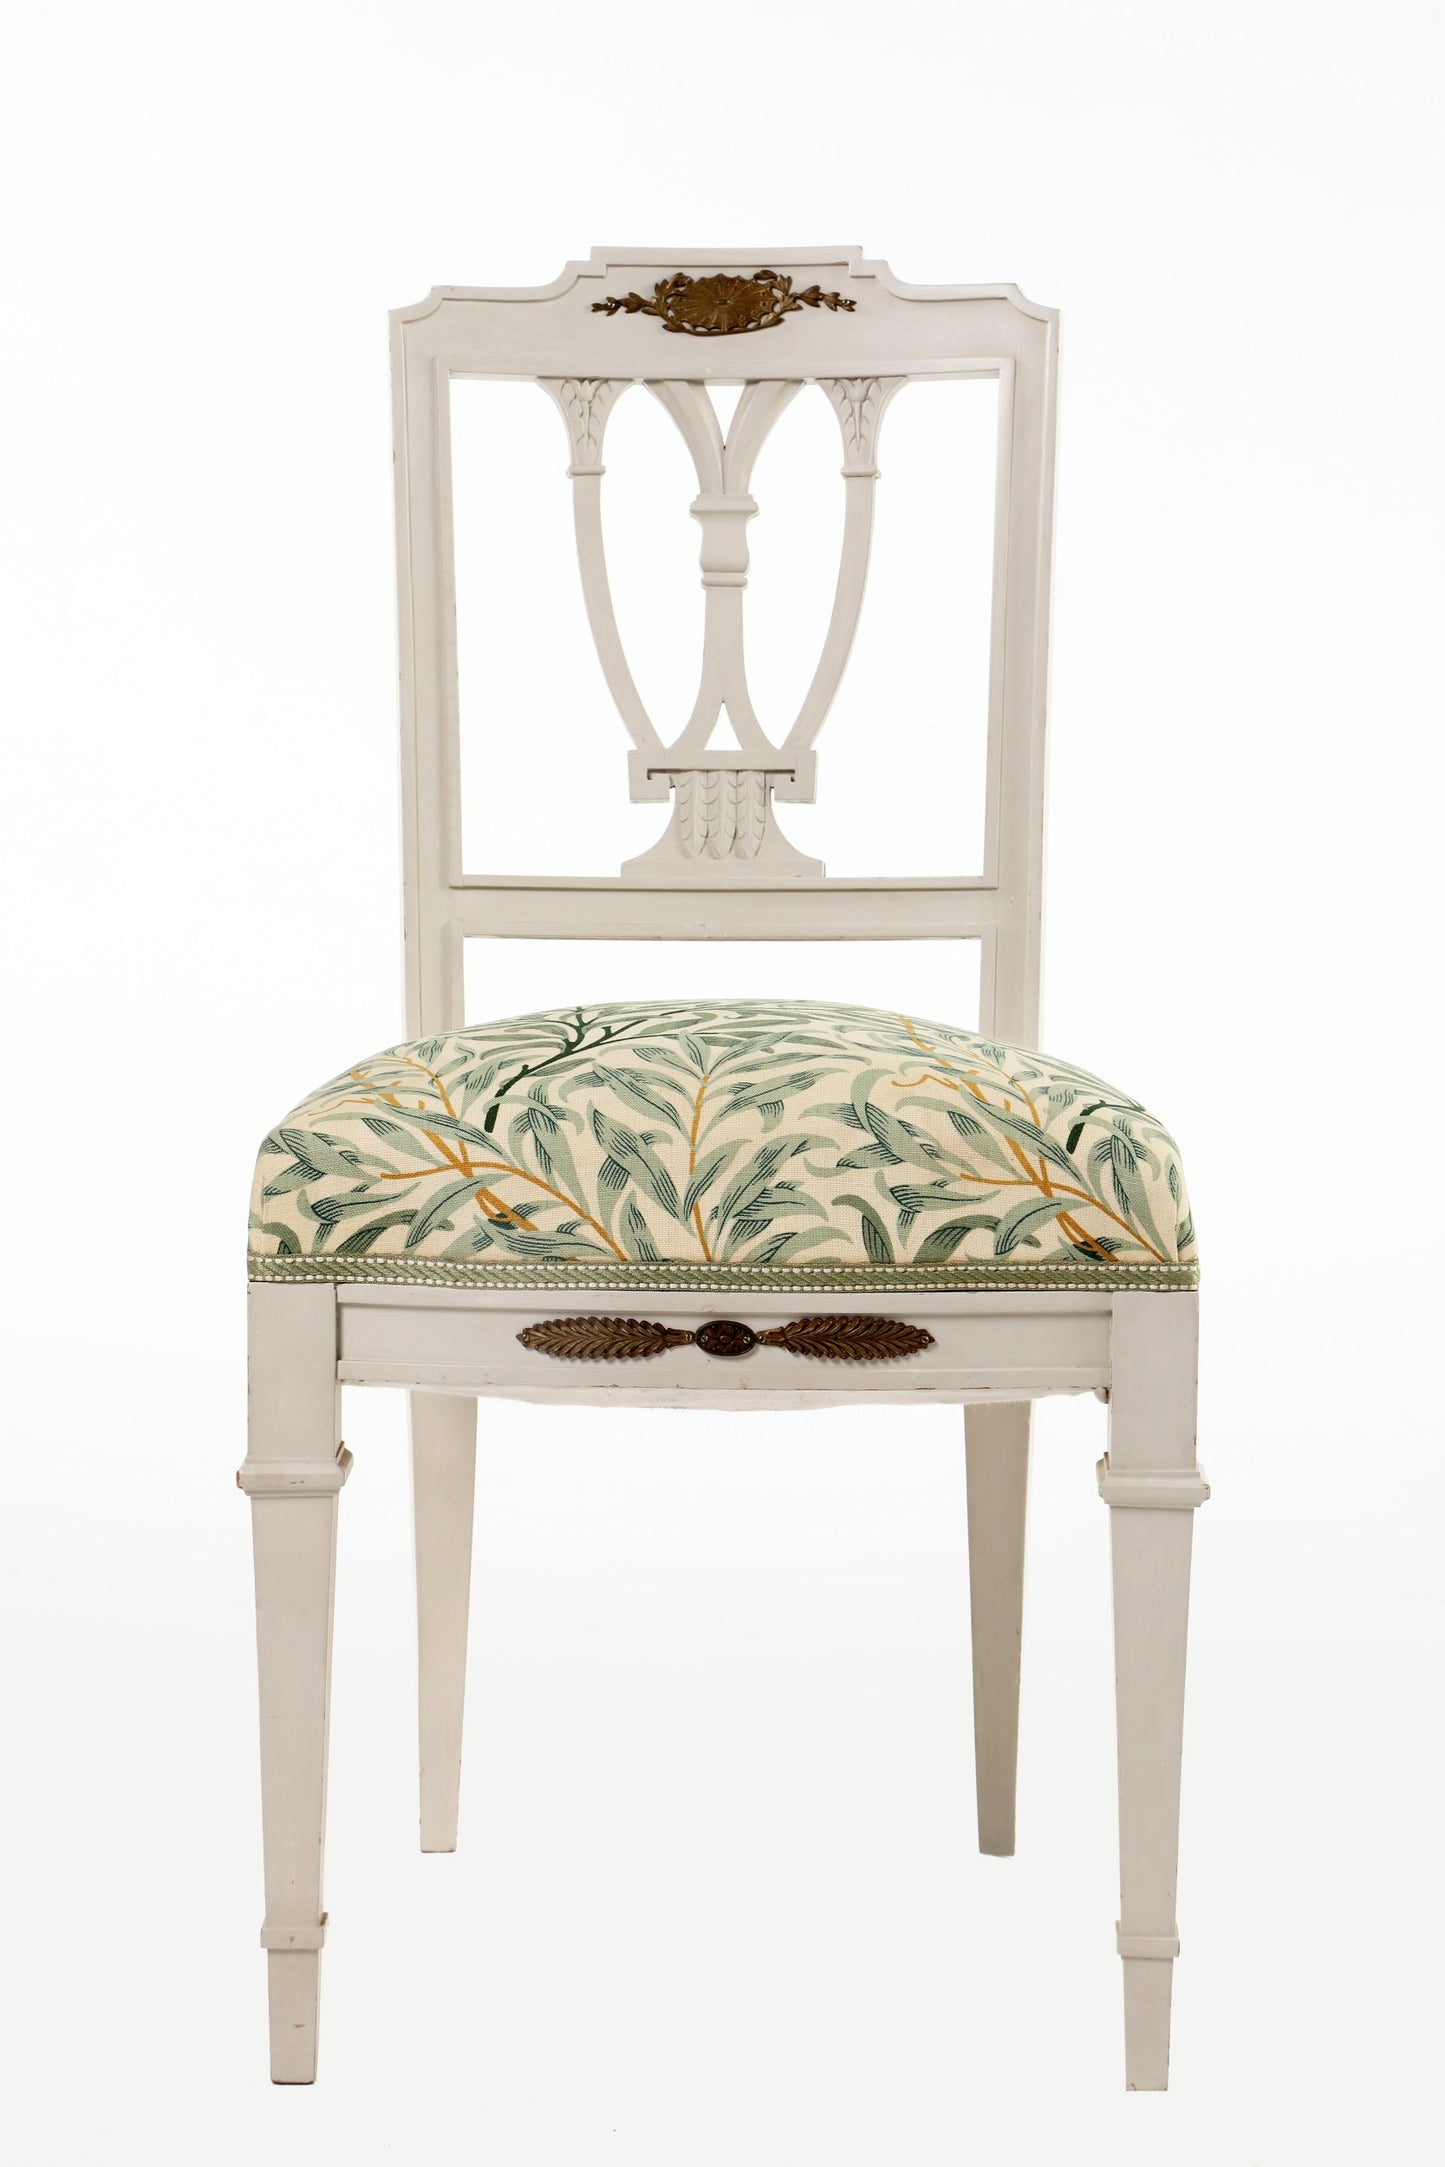 1950s chair in ivory lacquered leaf print